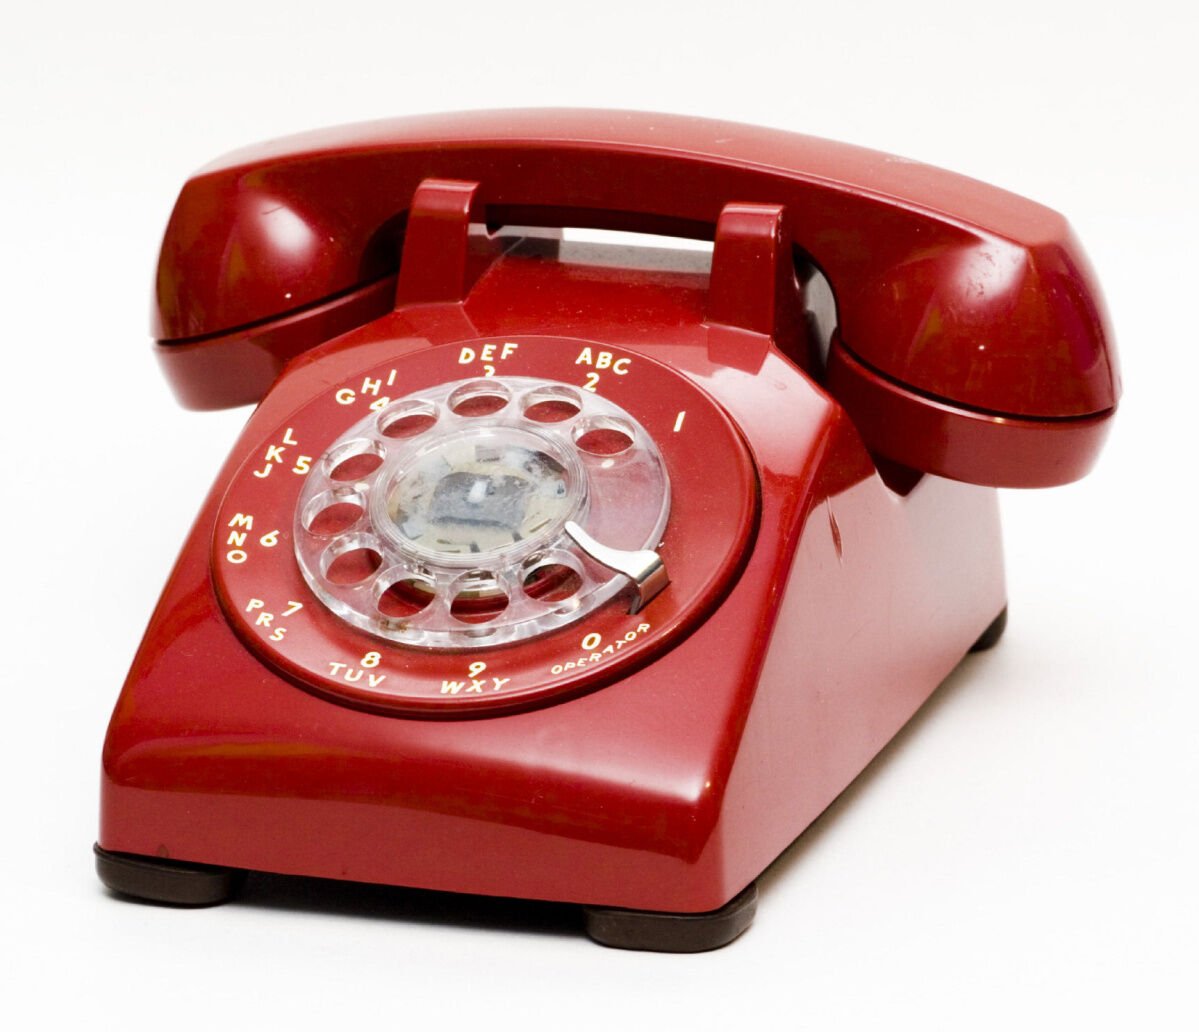 Rotary phone: Dial up the memories